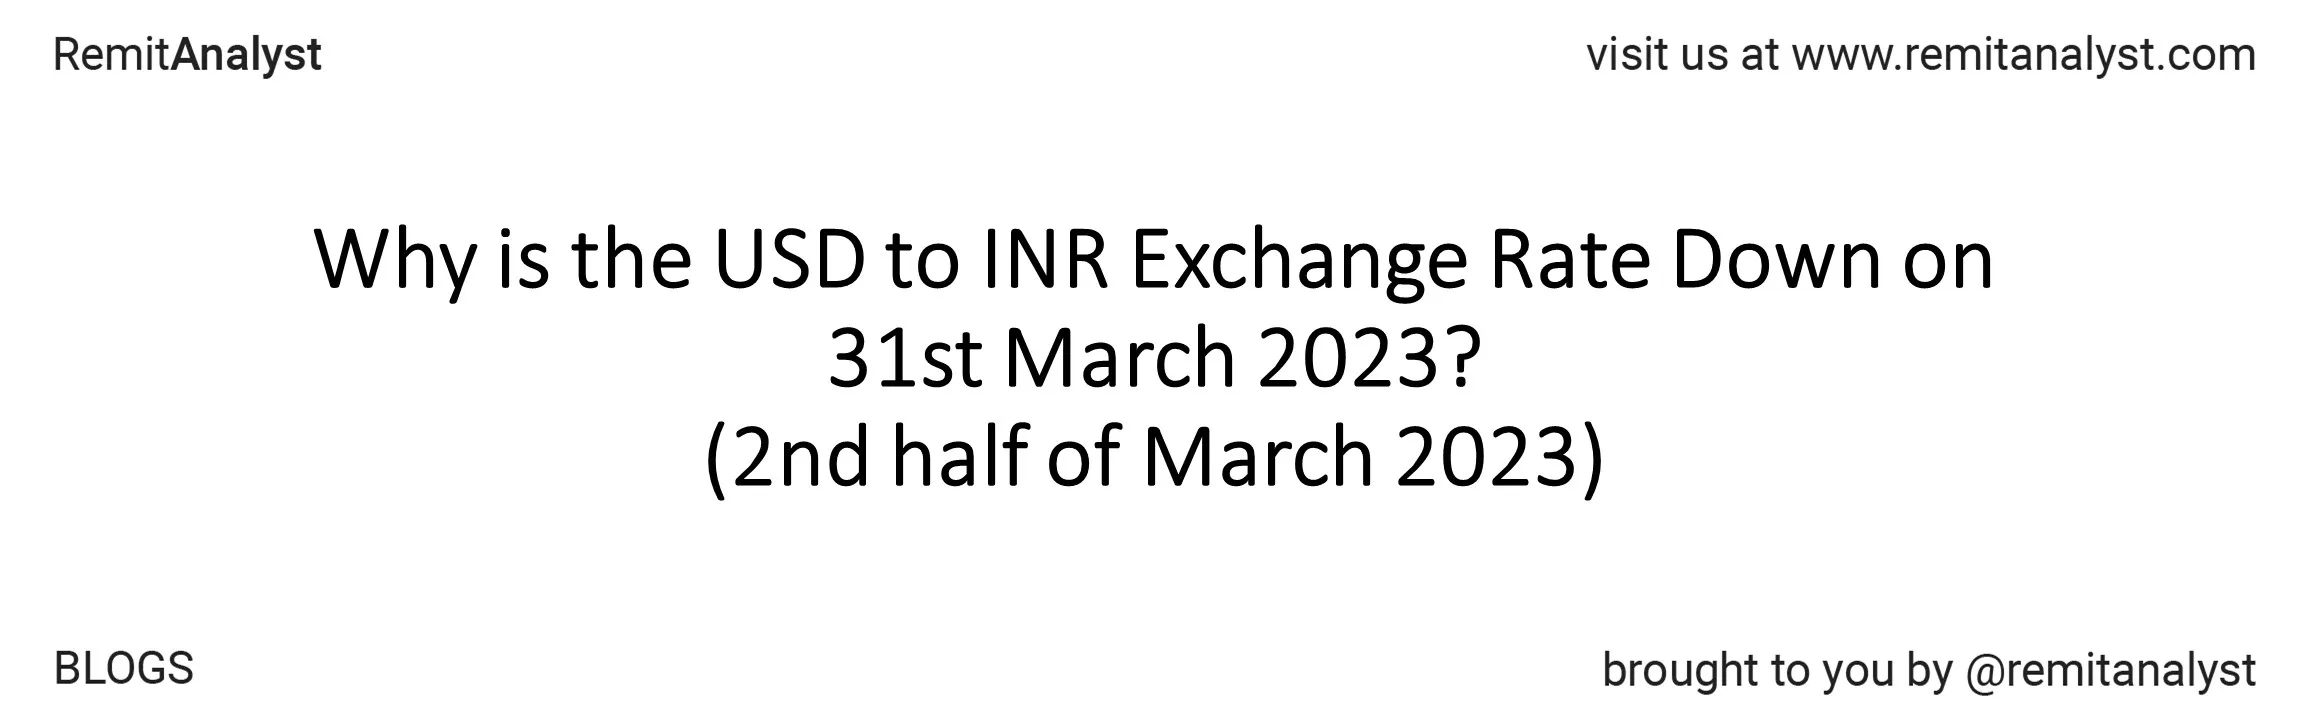 usd-to-inr-exchange-rate-16-mar-2023-to-31-mar-2023-title